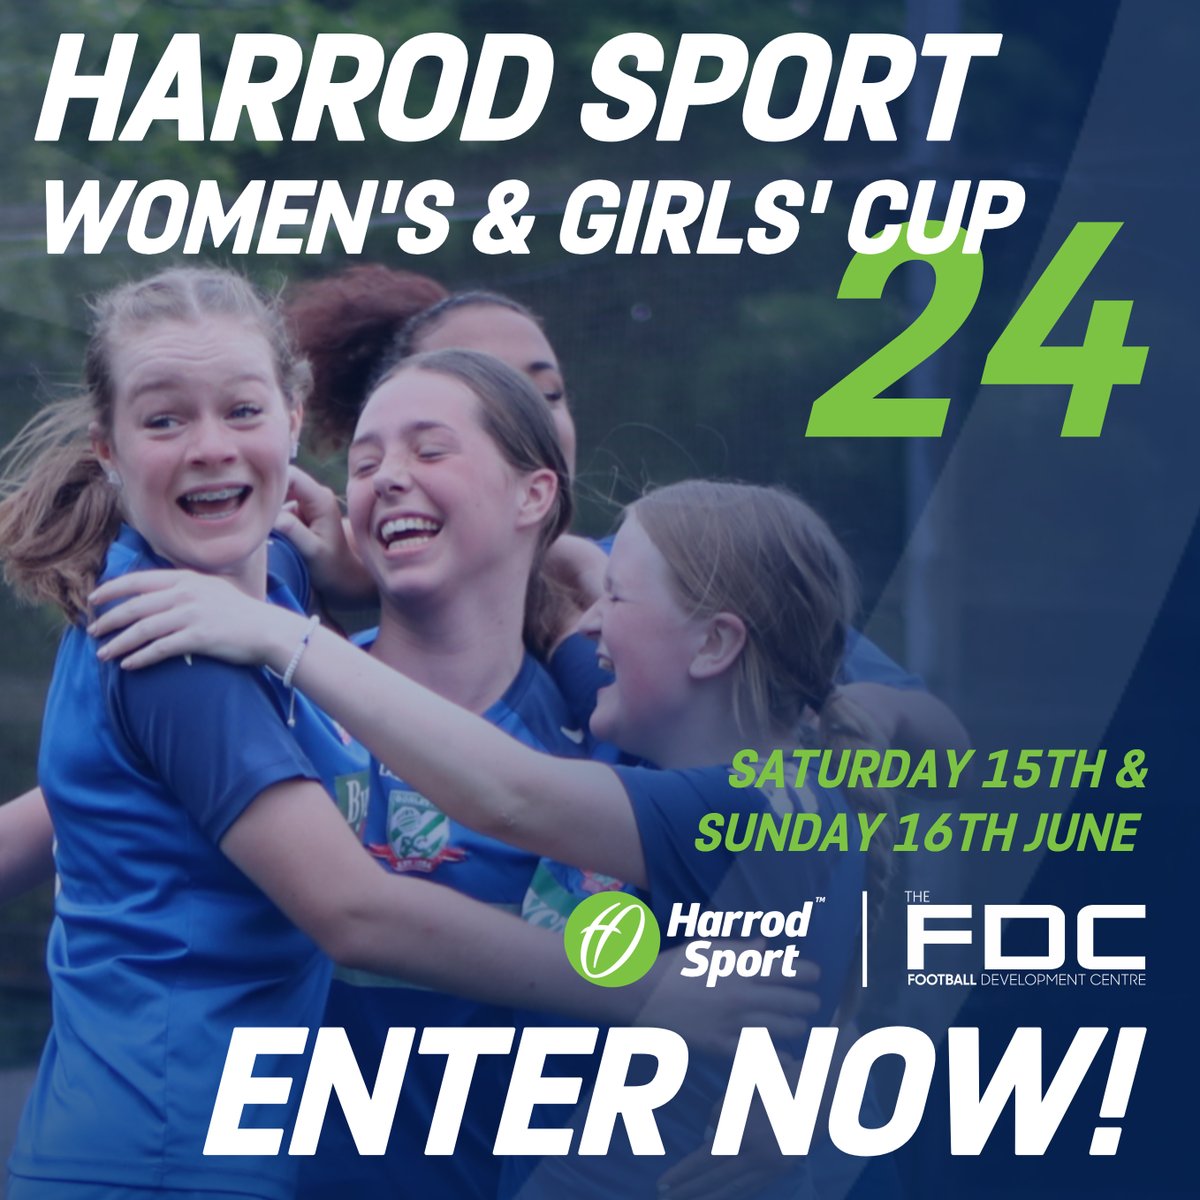 The @HarrodSport Women's & Girls' Cup is almost here 🔜 Check out the availability and get registered below 👇 pitchbooking.com/book/event/551…